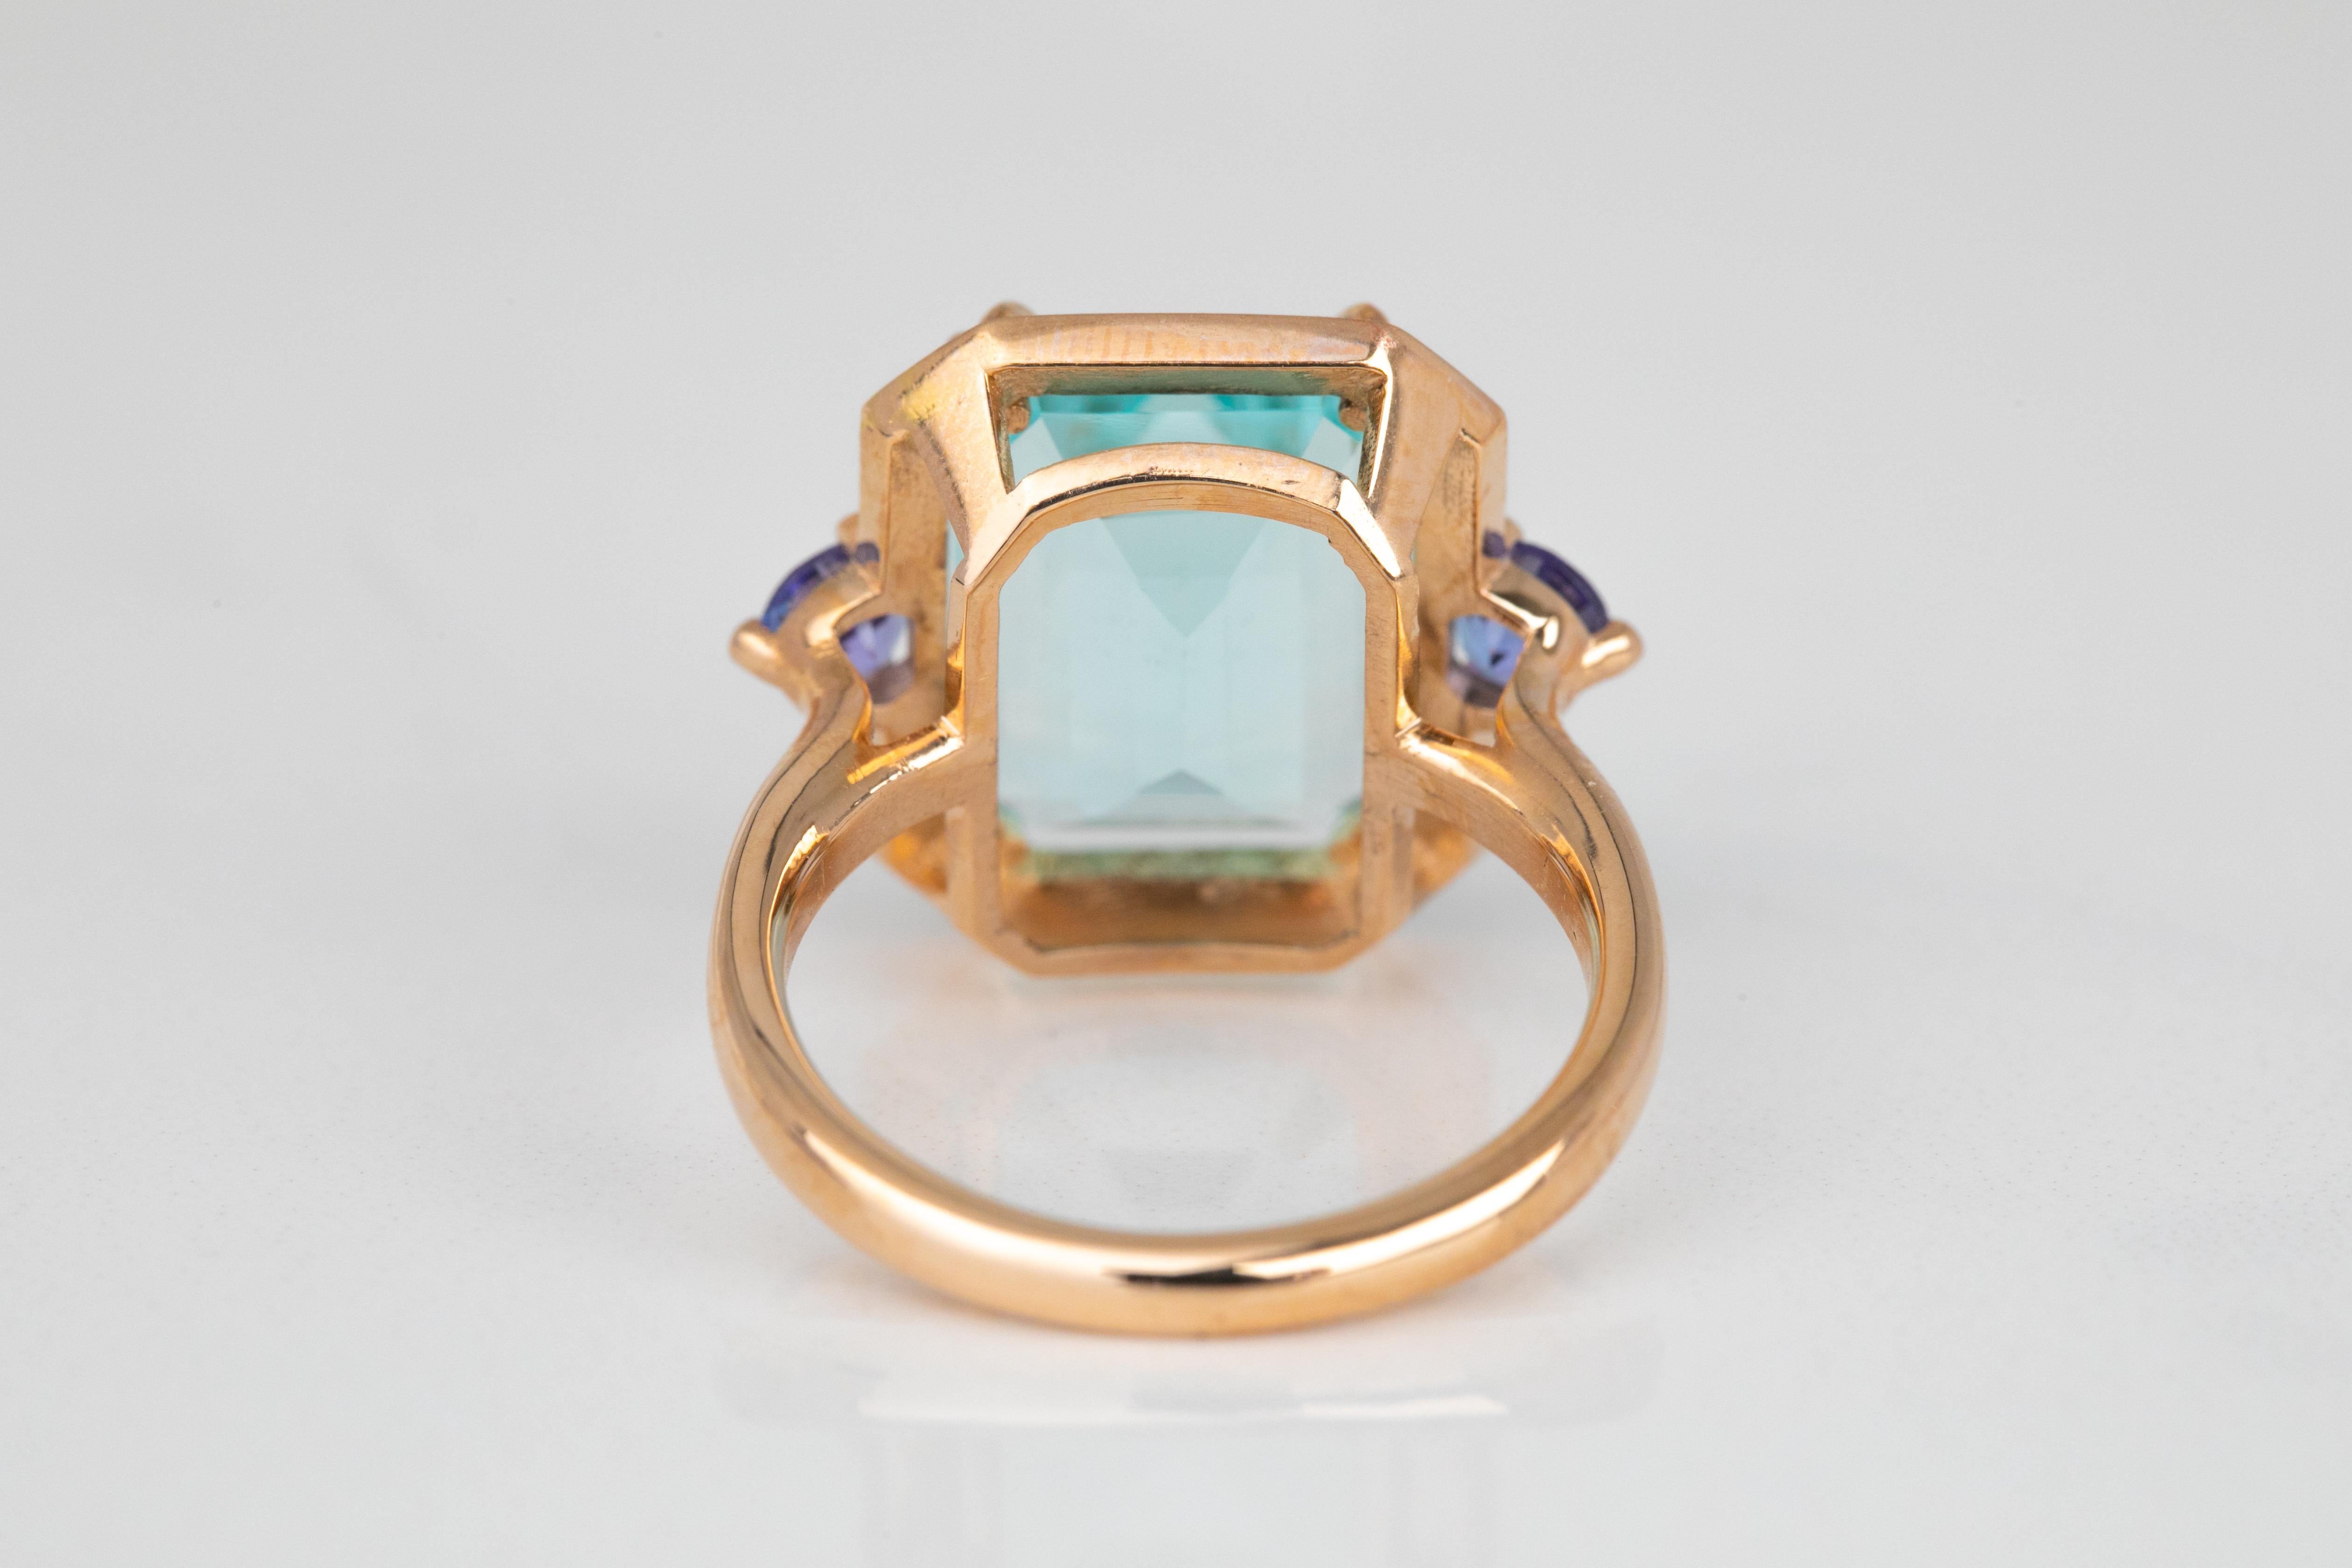 For Sale:  Art Deco Style 14k Rose Gold Ring 6.13ct Sky Topaz and 0.40ct Ceylon Sapphire 4